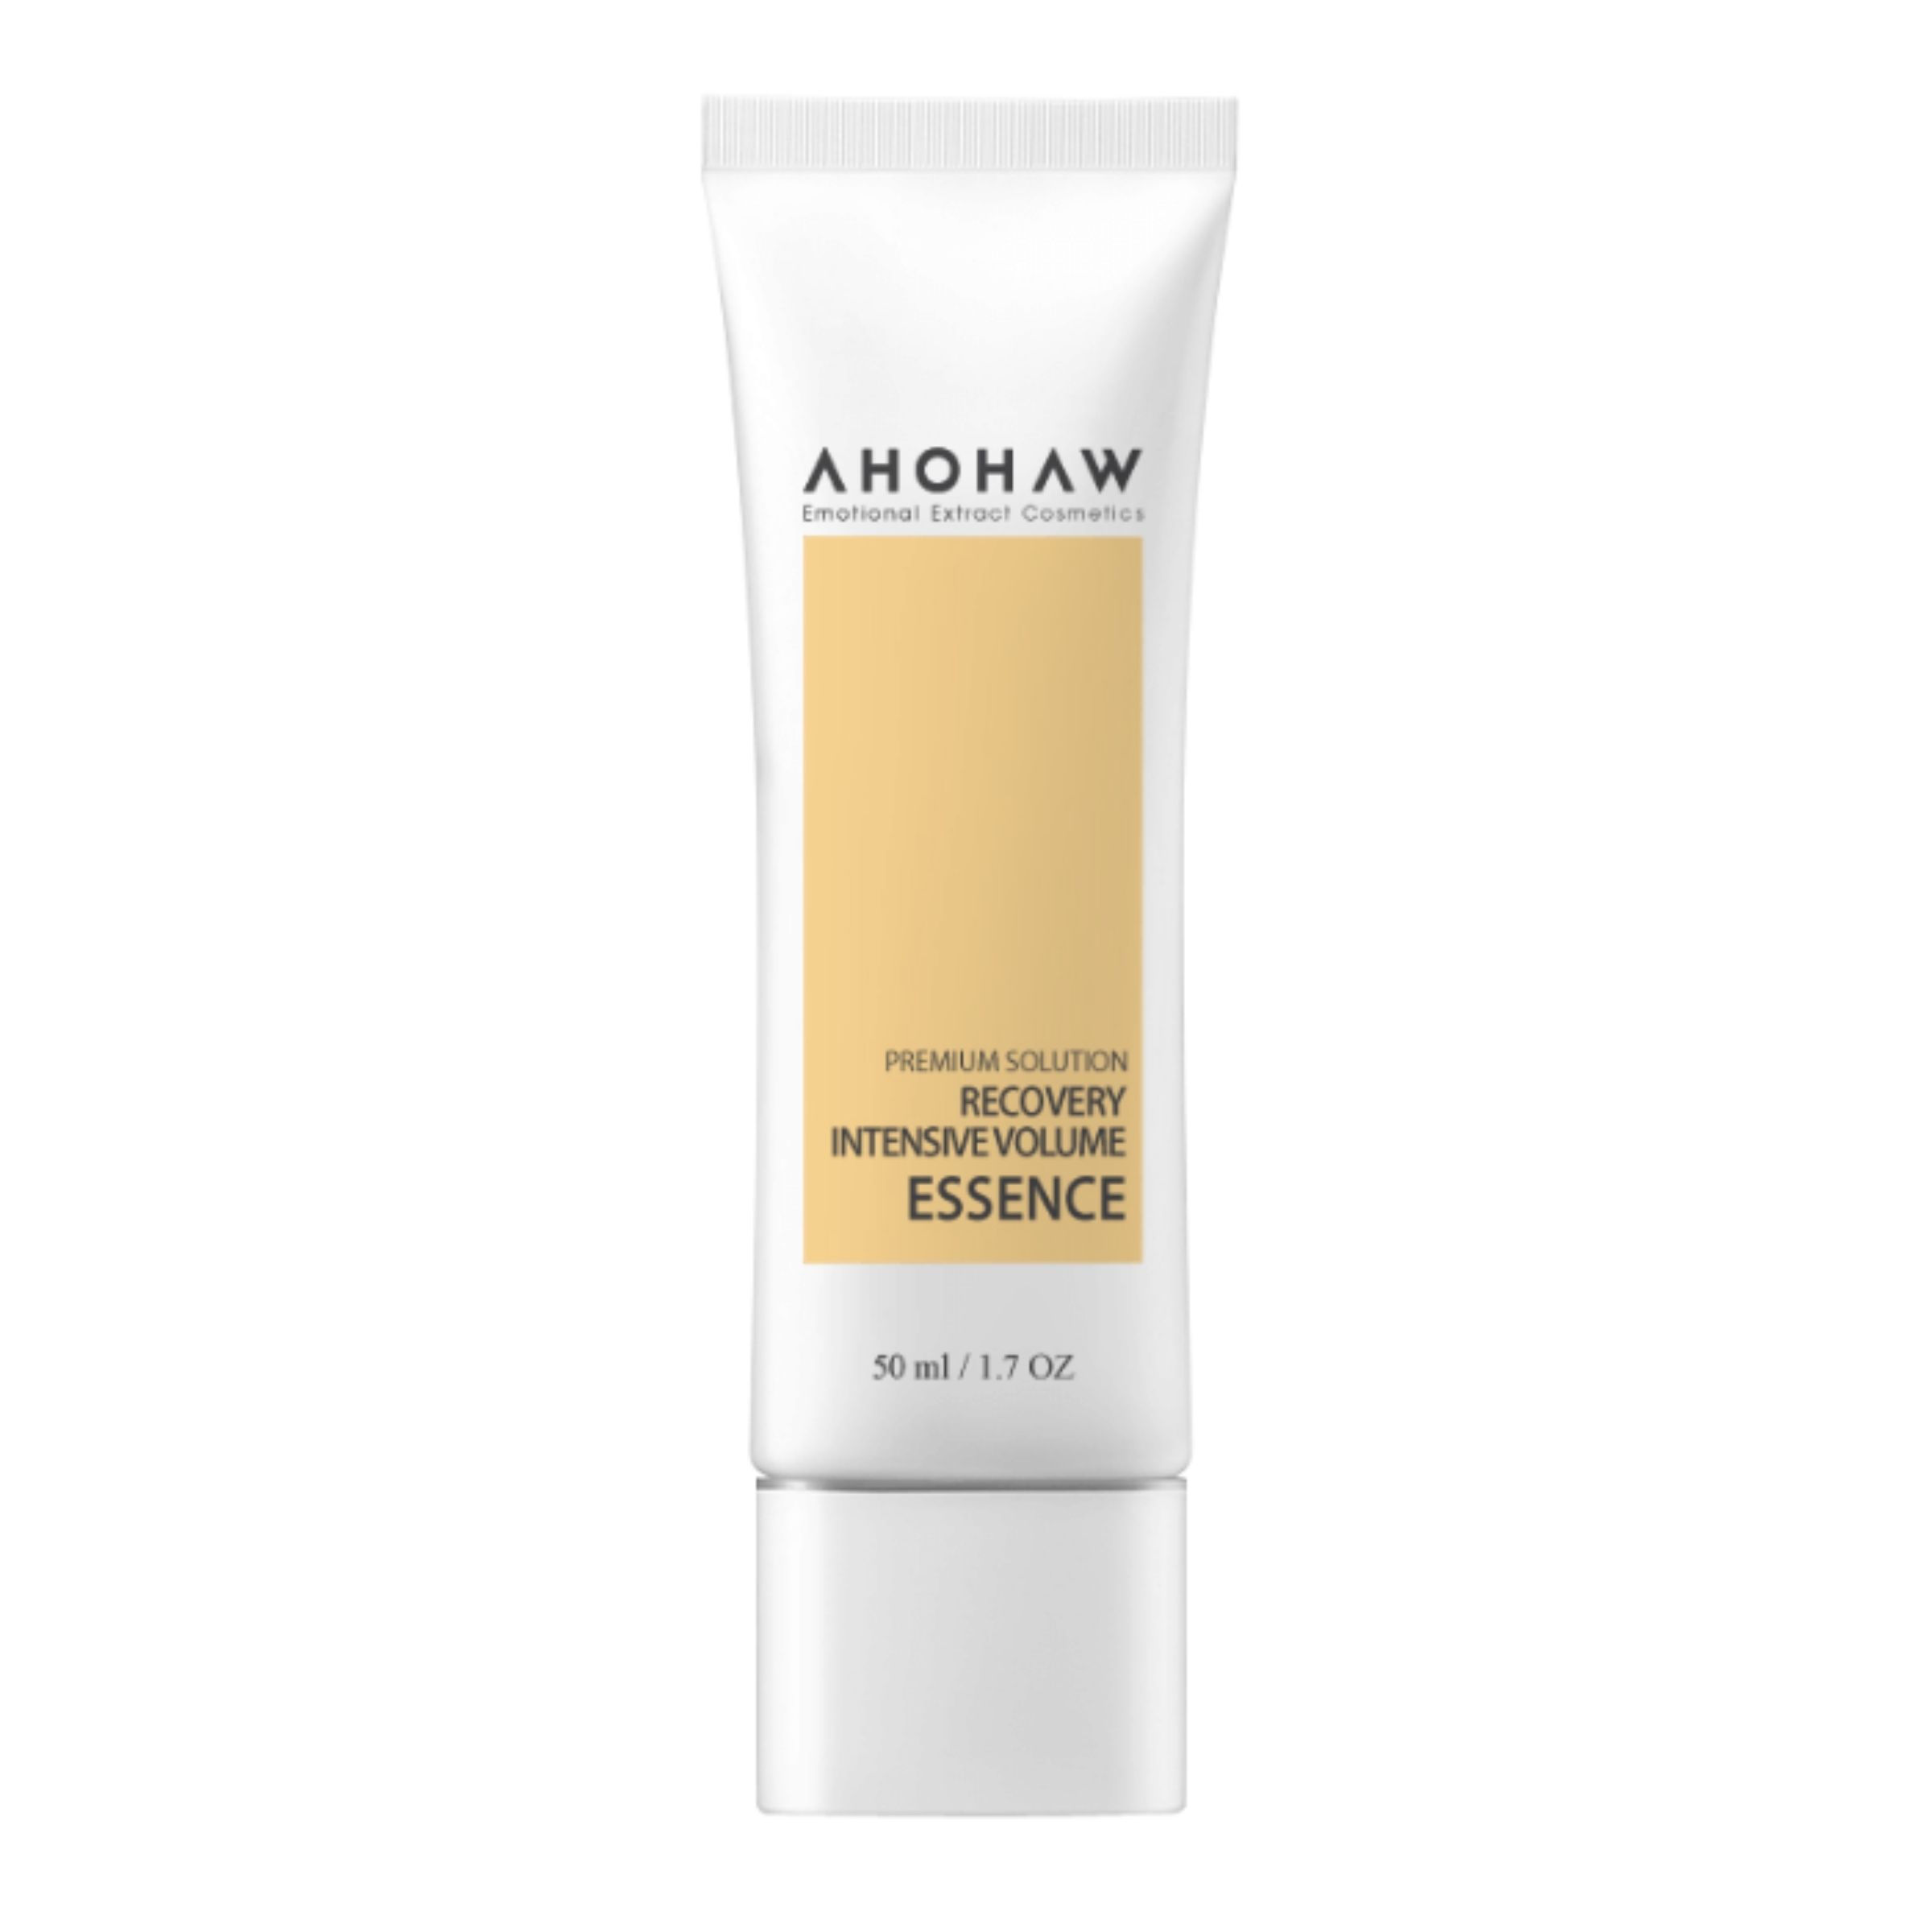 Ahohaw - Recovery Intensive Volume Essence